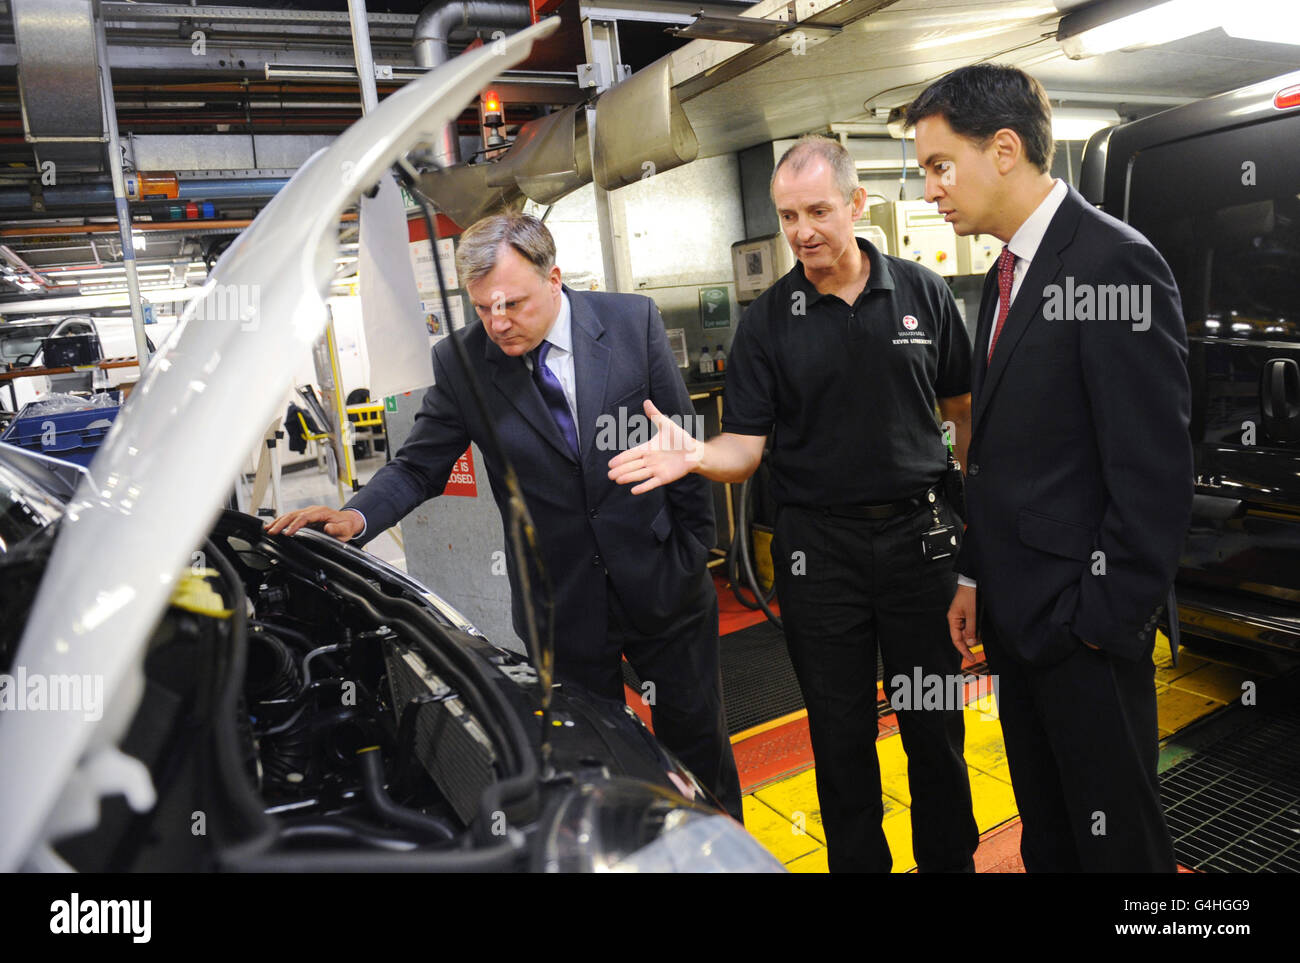 Labour leader Ed Miliband and Shadow Chancellor Ed Balls visit the Vauxhall Motors plant in Luton today. Stock Photo